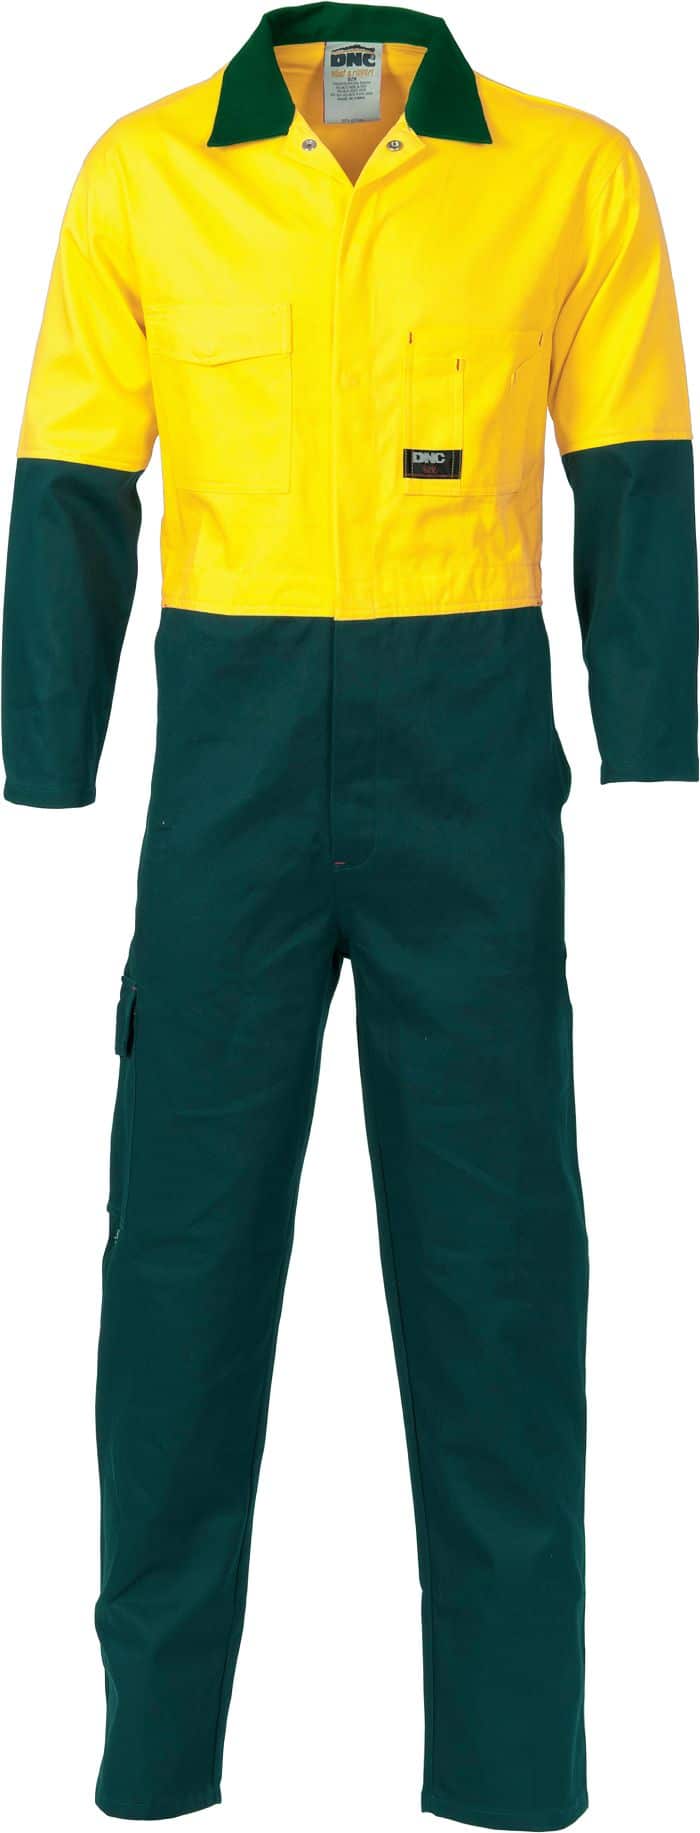 Details about   Hi Vis Two Tone 311gsm Heavy COTTON DRILL Metal Press Stud Work Coveralls 3851